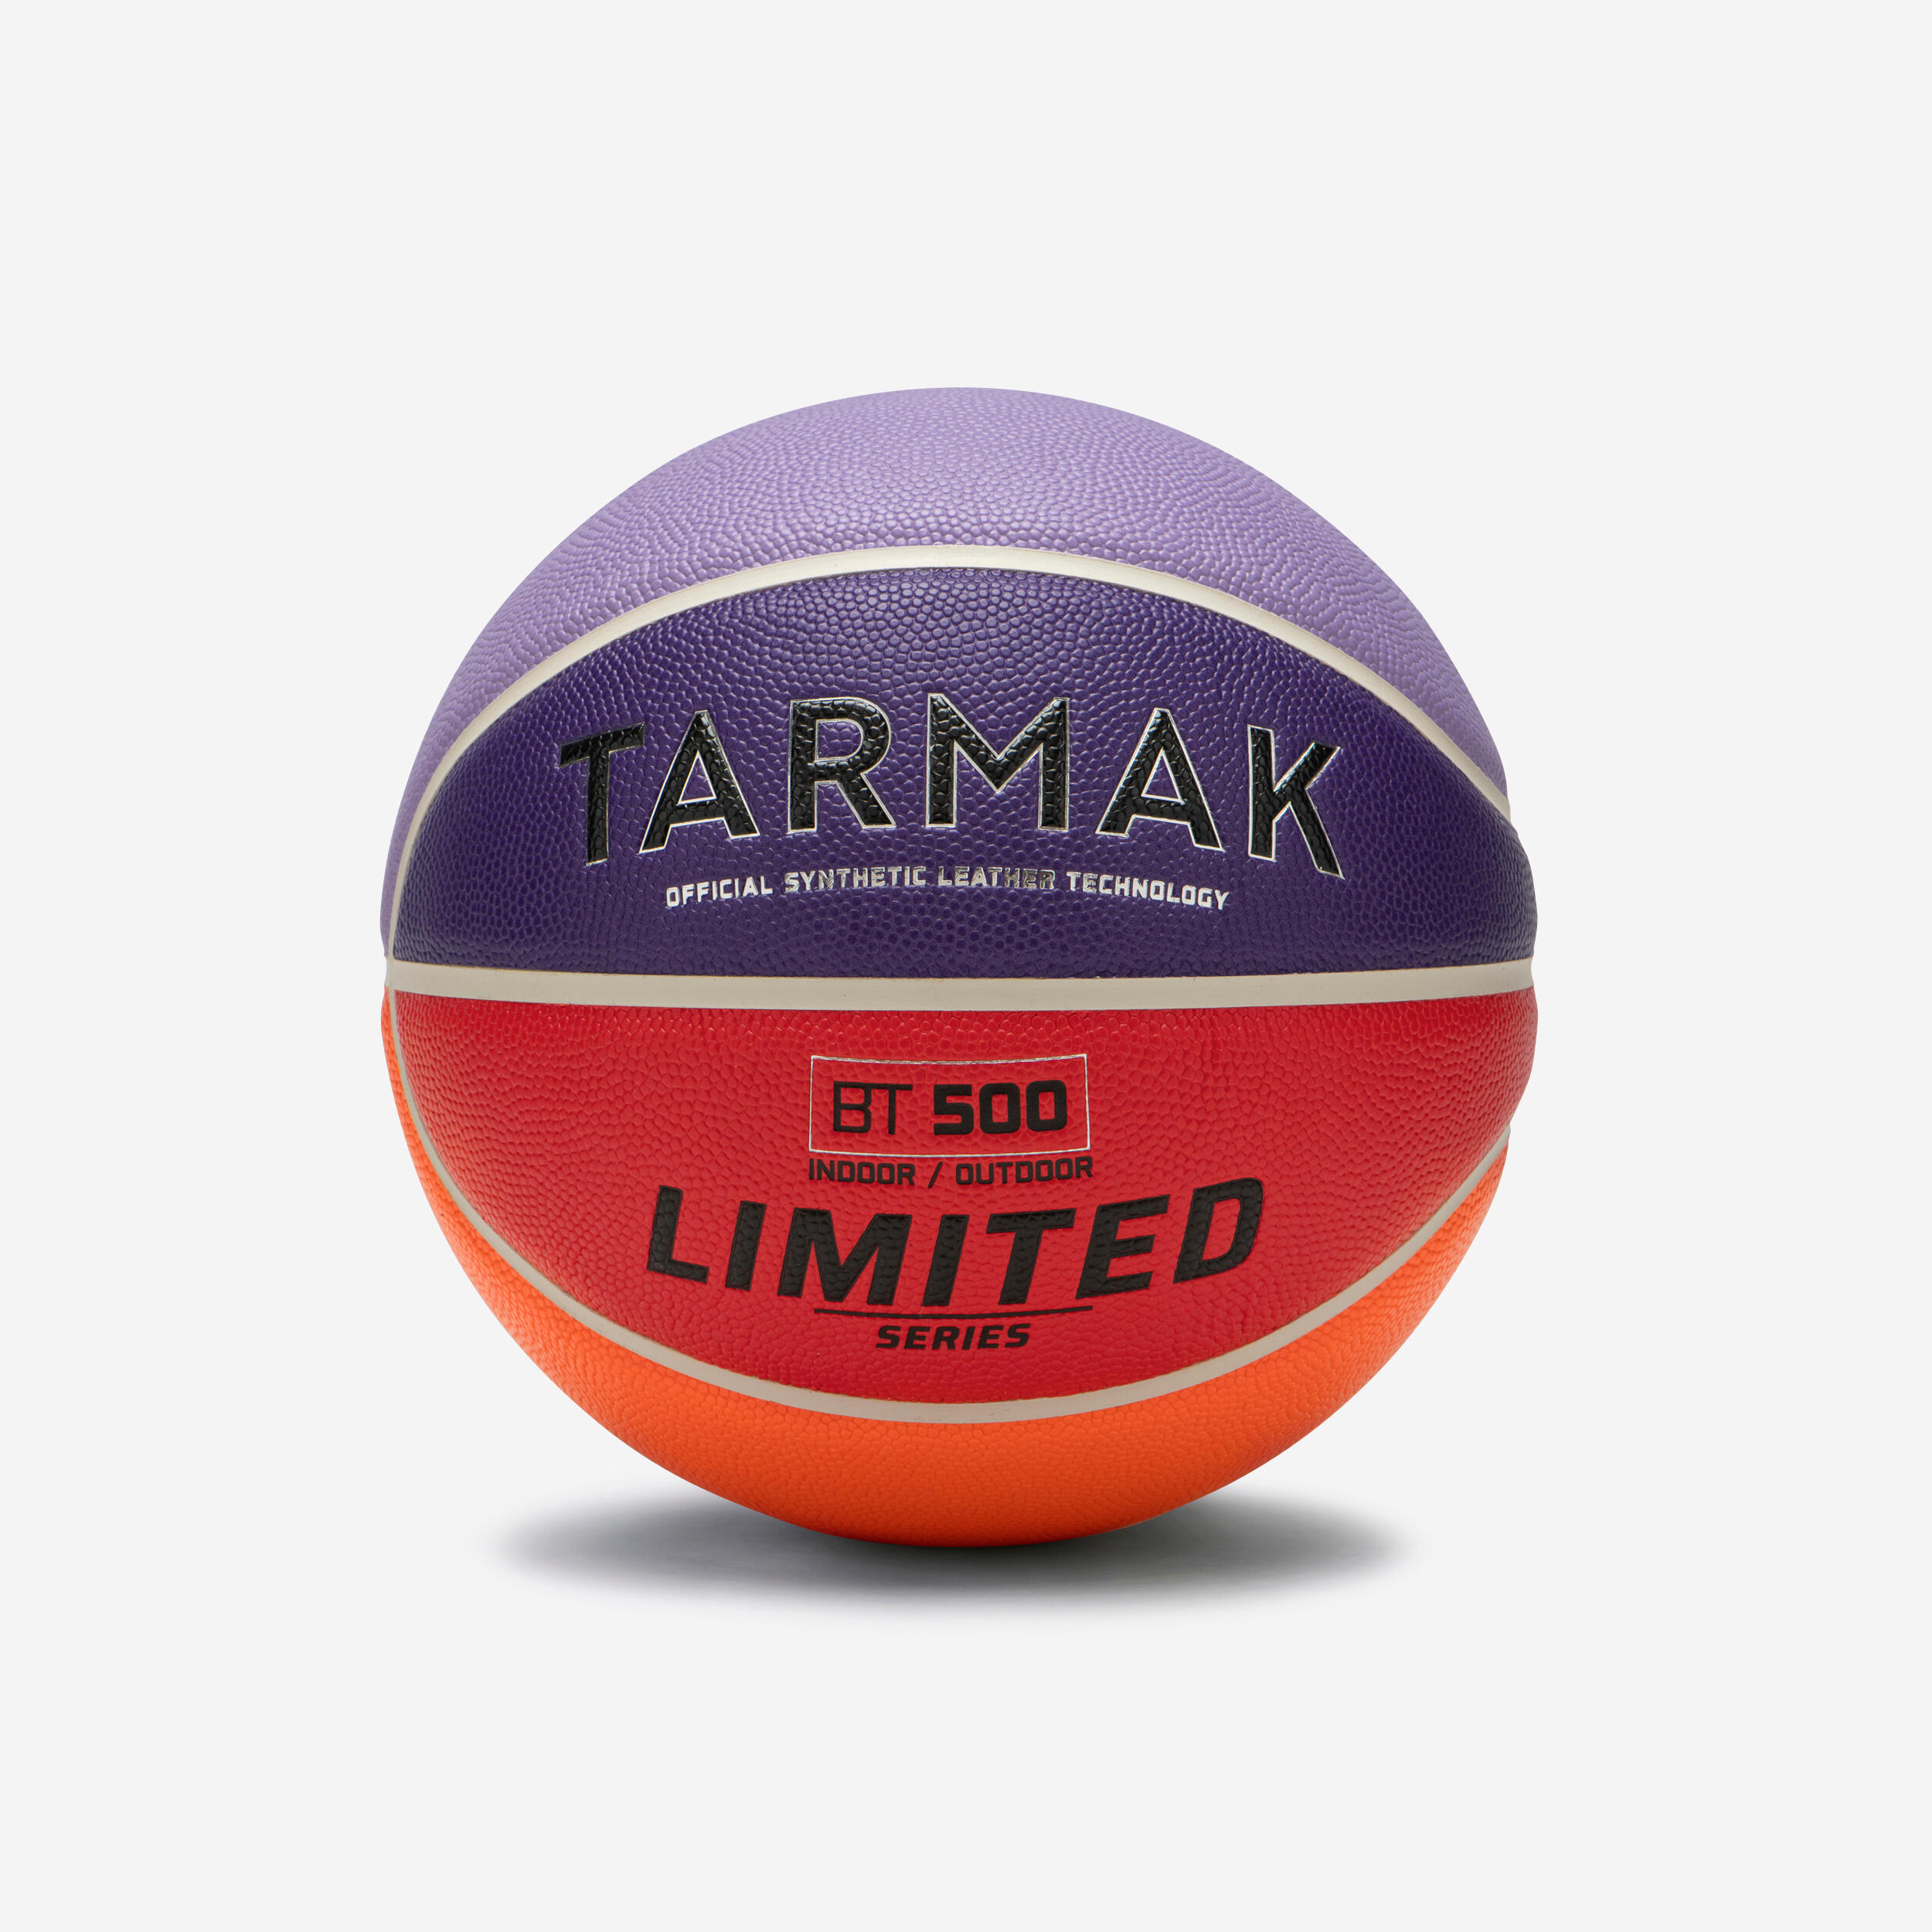 TARMAK Limited Edition Basketball Size 6 BT500 Touch - Purple/Red